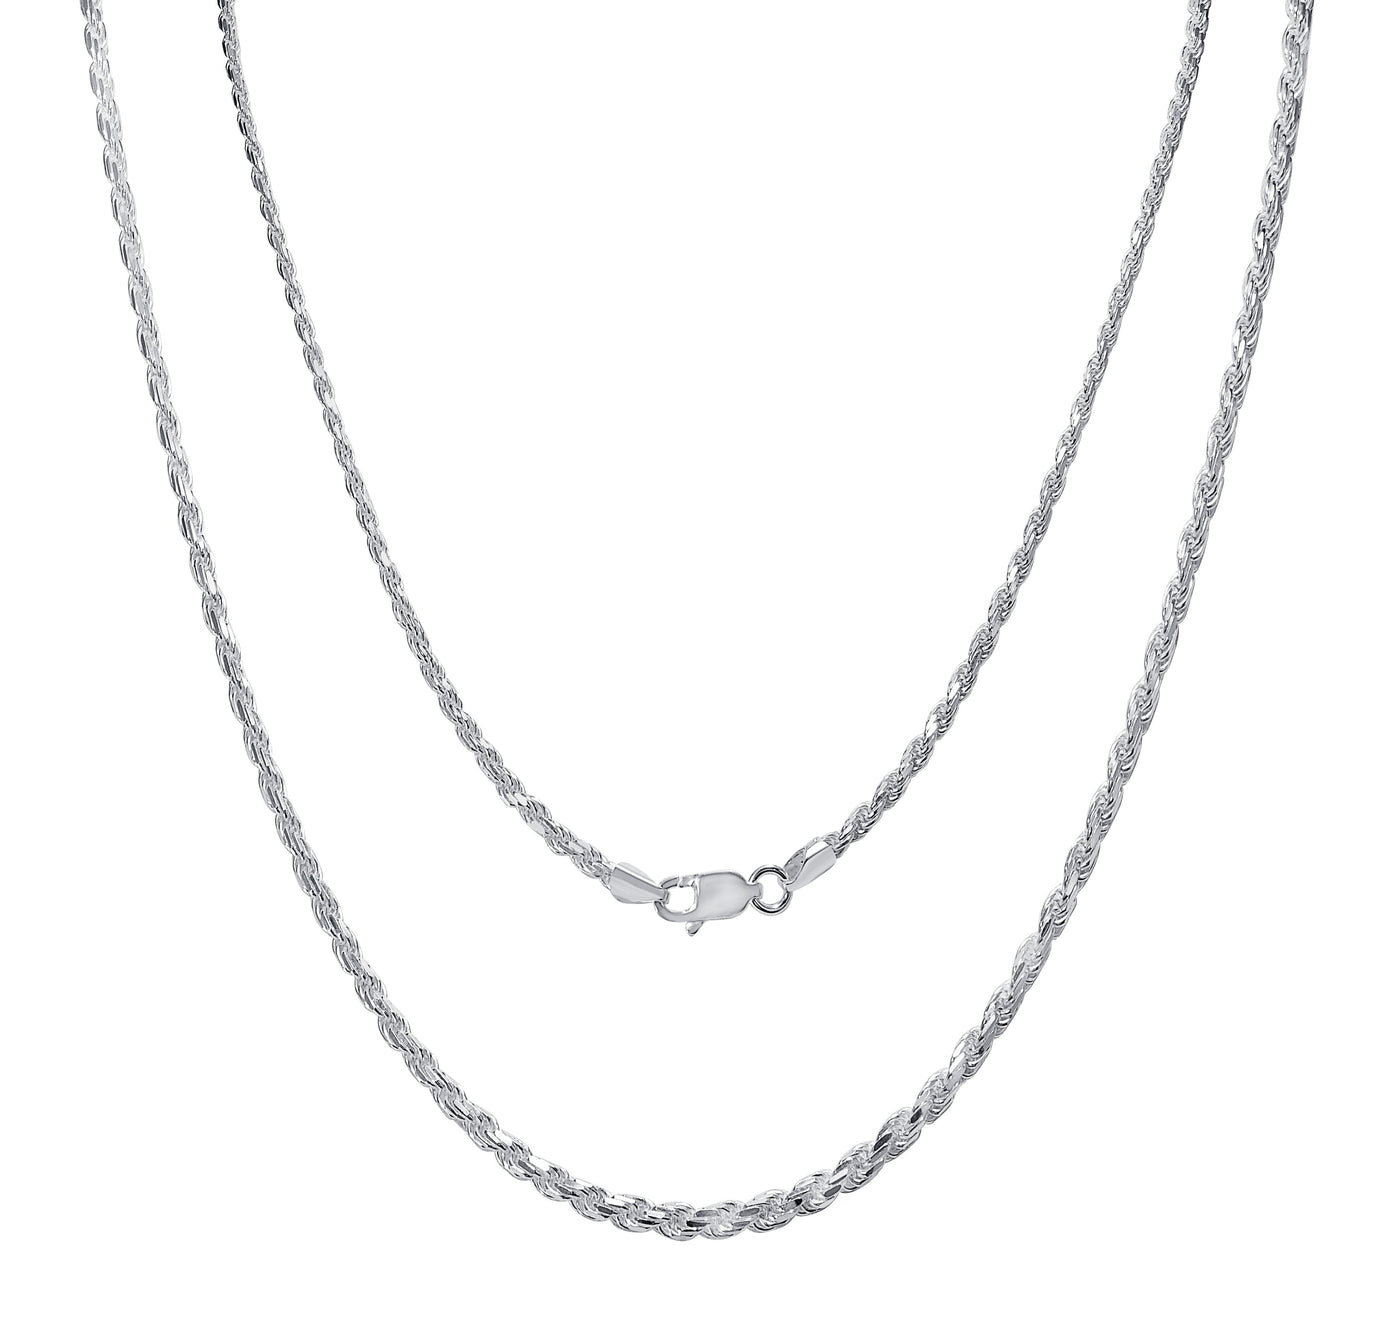 Italian Sterling Silver 2mm Diamond-Cut Rope Chain Necklace, 16"- 26"